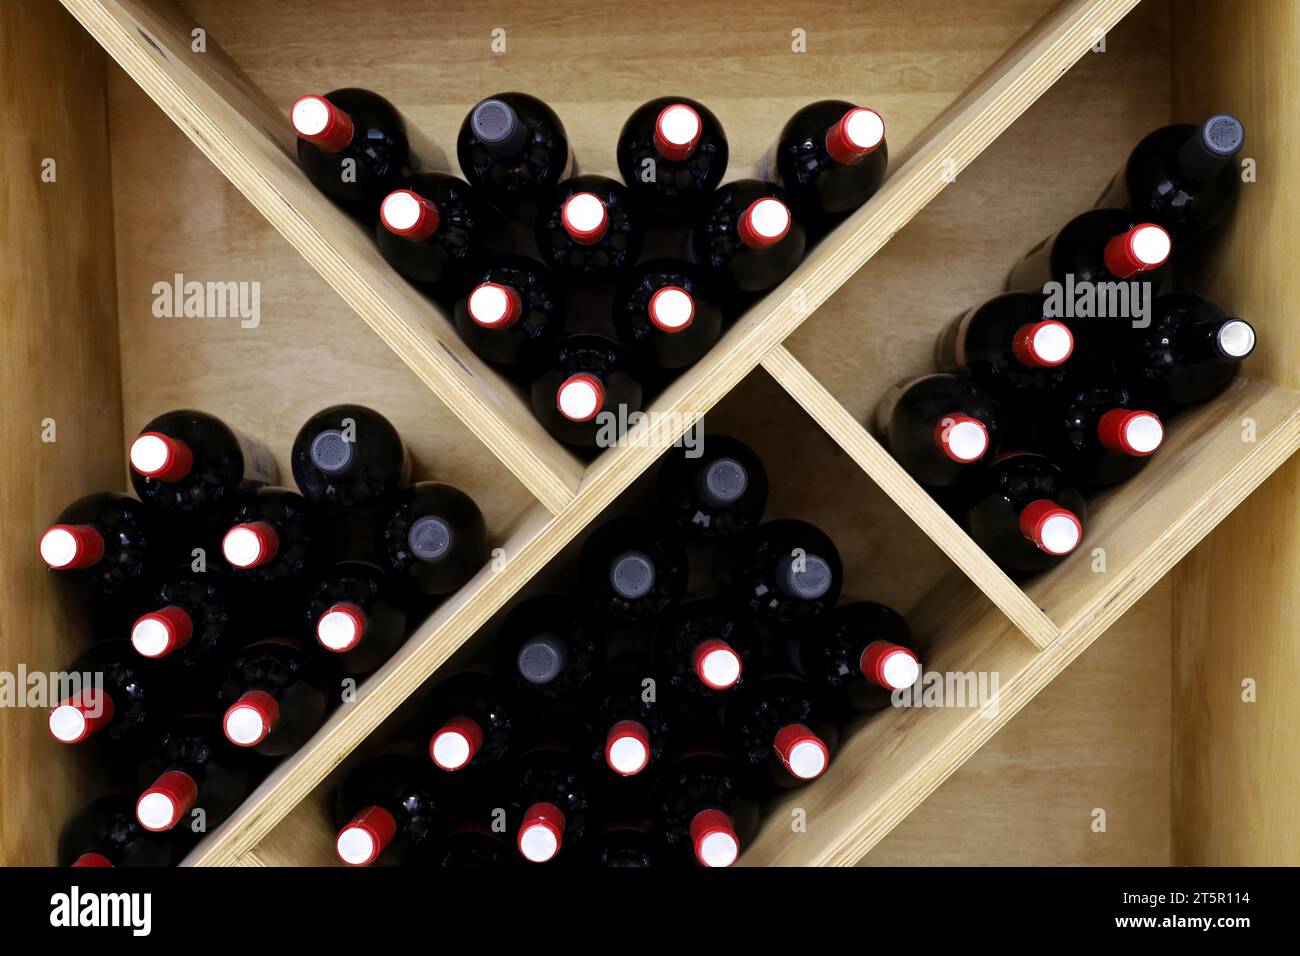 Wine bottles in a wooden wine rack. Liquor store, white and red wine Stock Photo